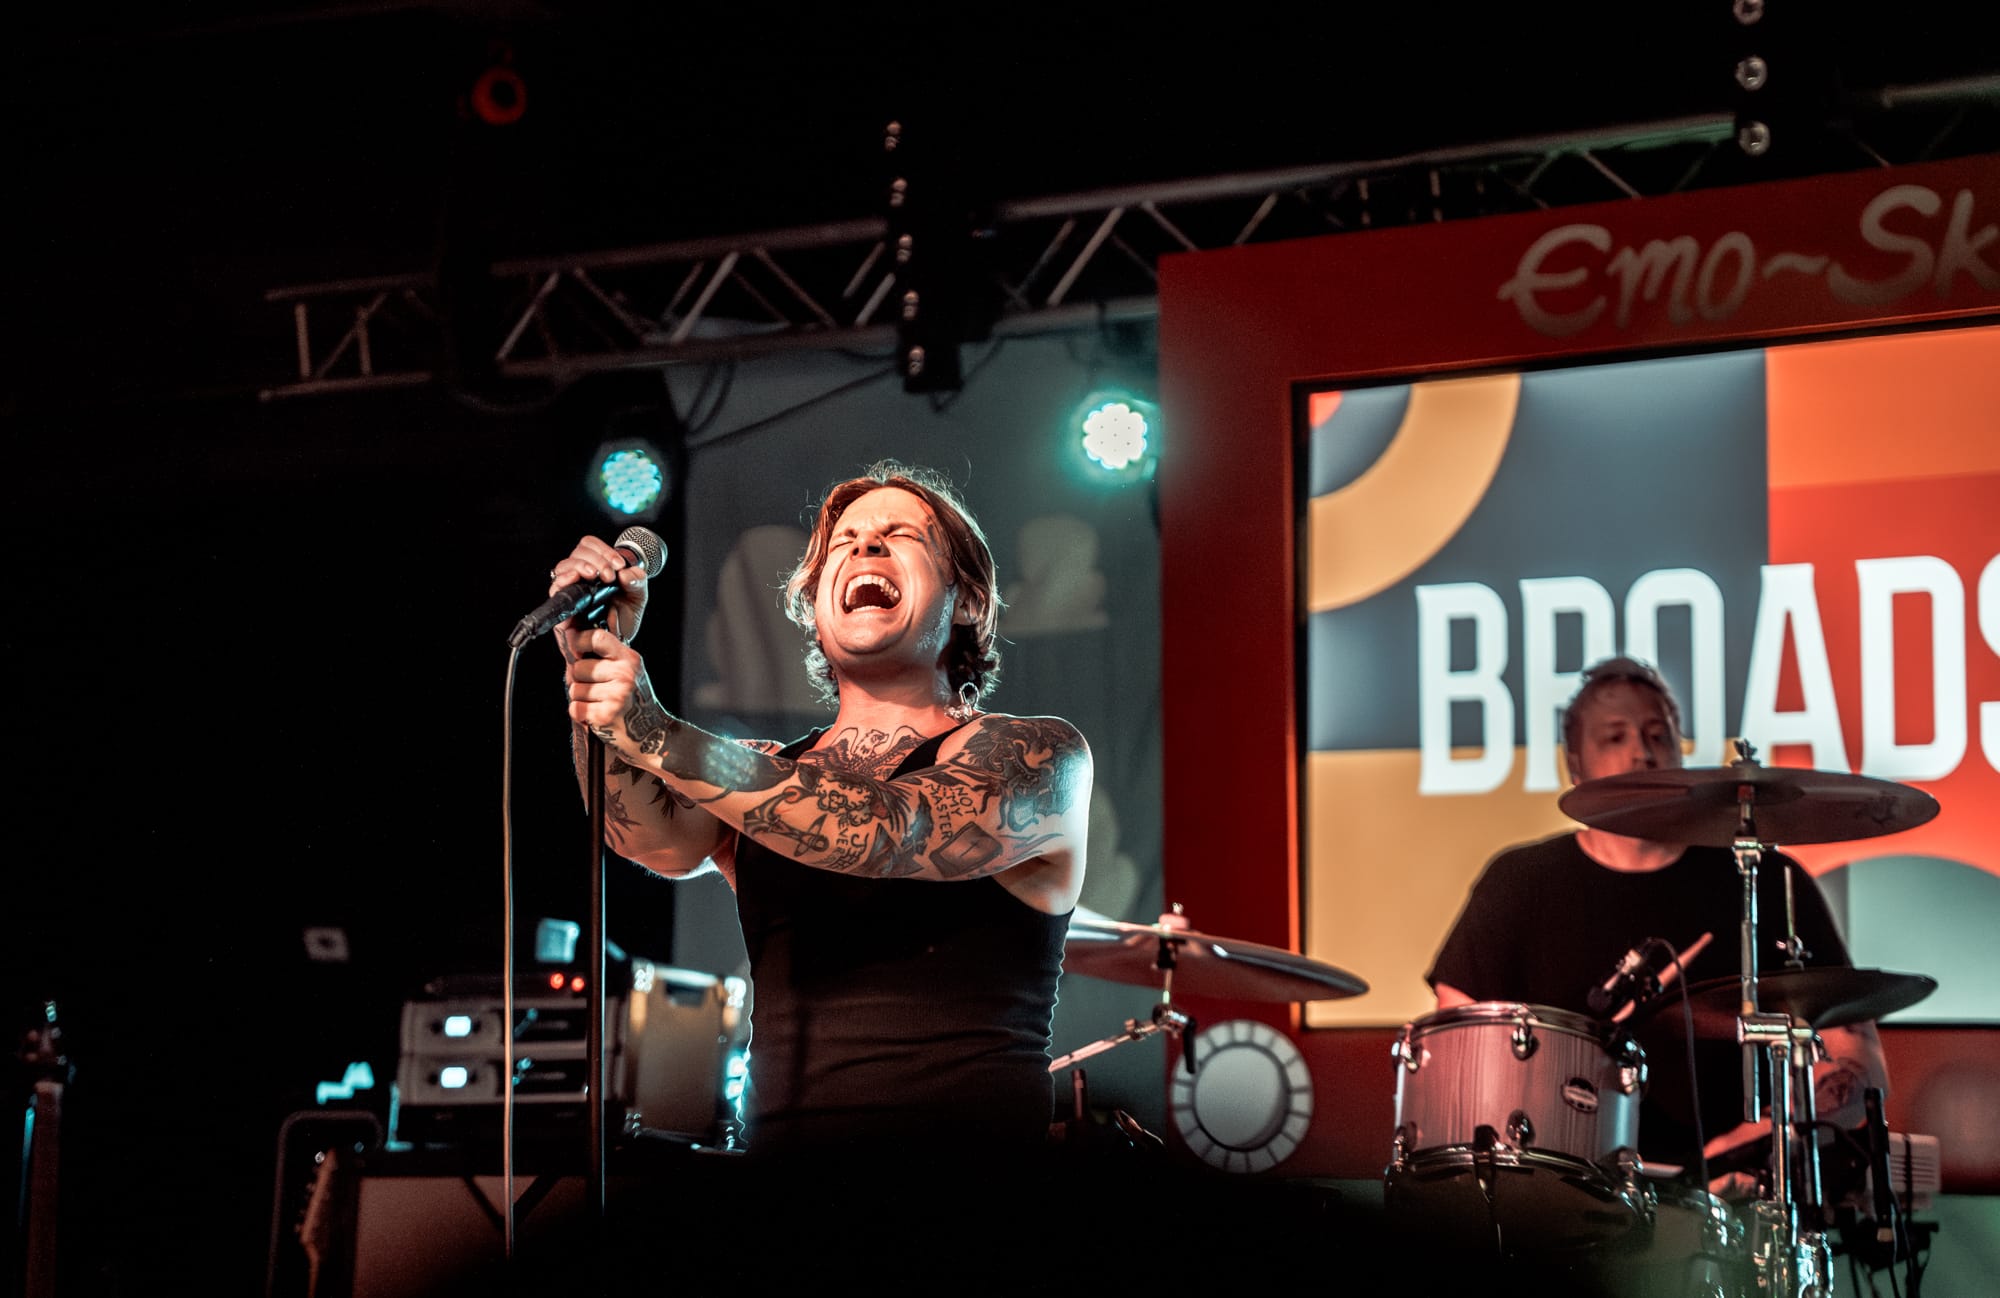 A Different Shade of Blue: Broadside Performs Explosive Set in Greensboro, North Carolina